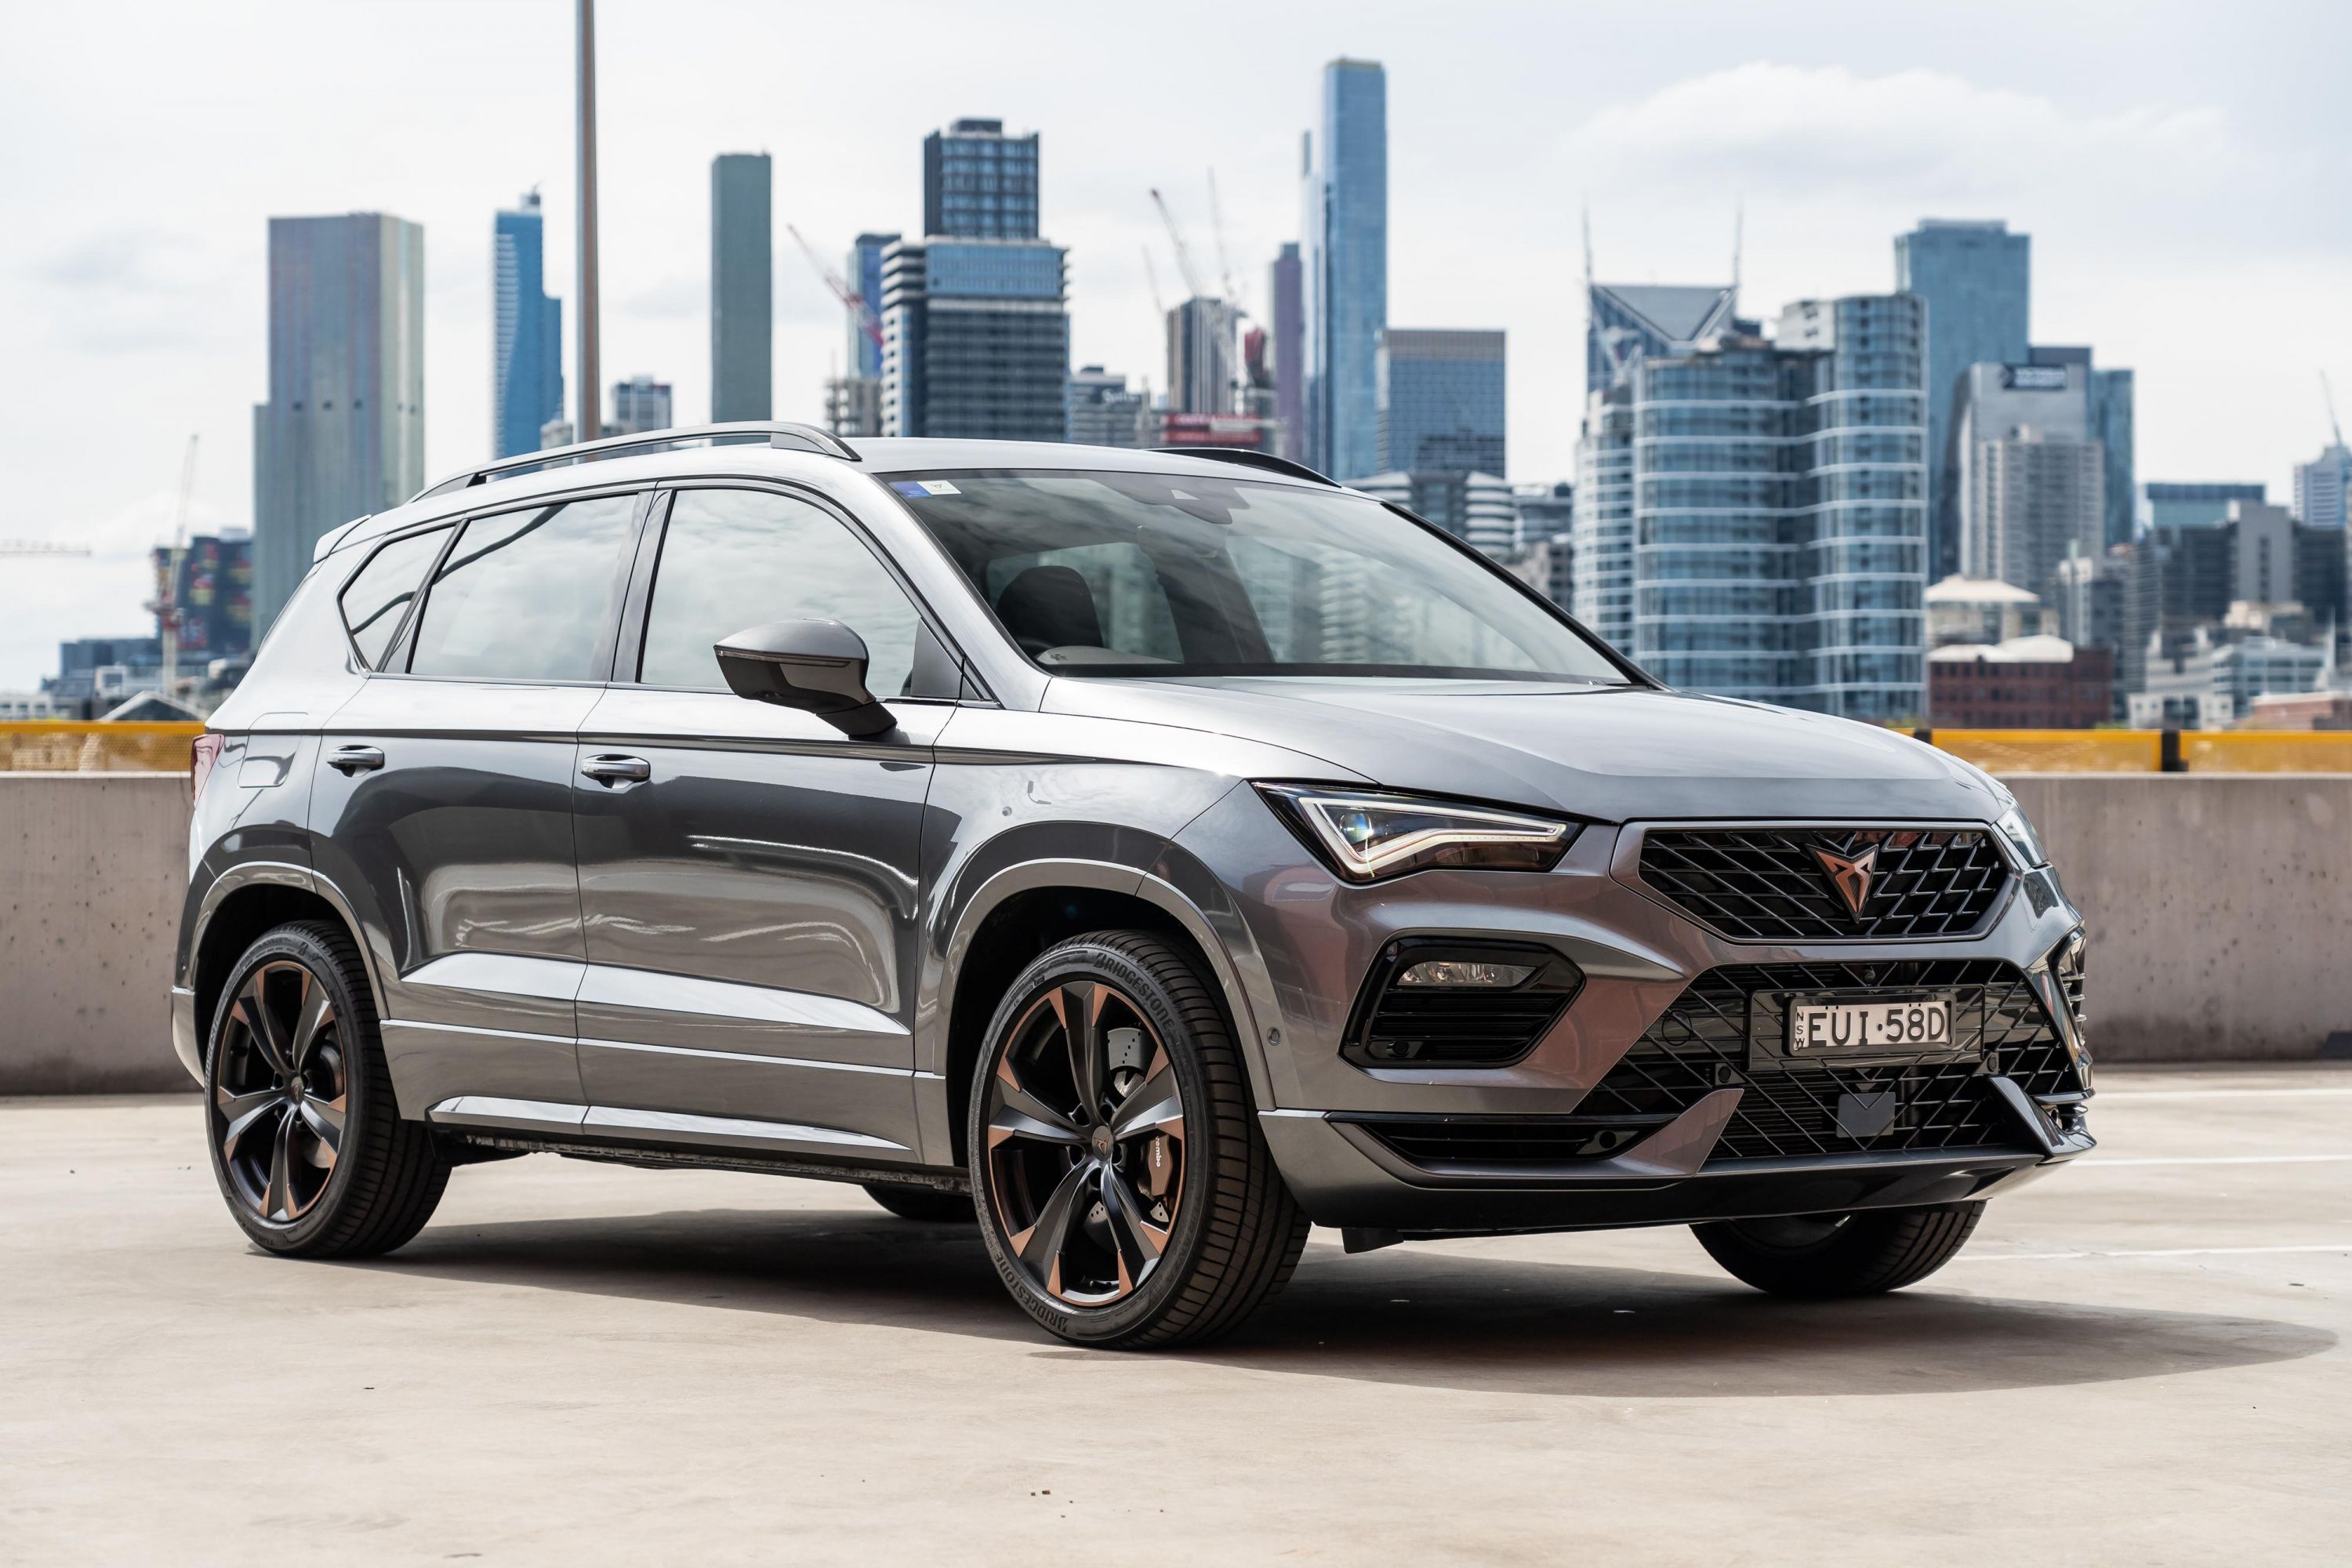 Facelifted 2020 Cupra Ateca arrives with improved dynamics